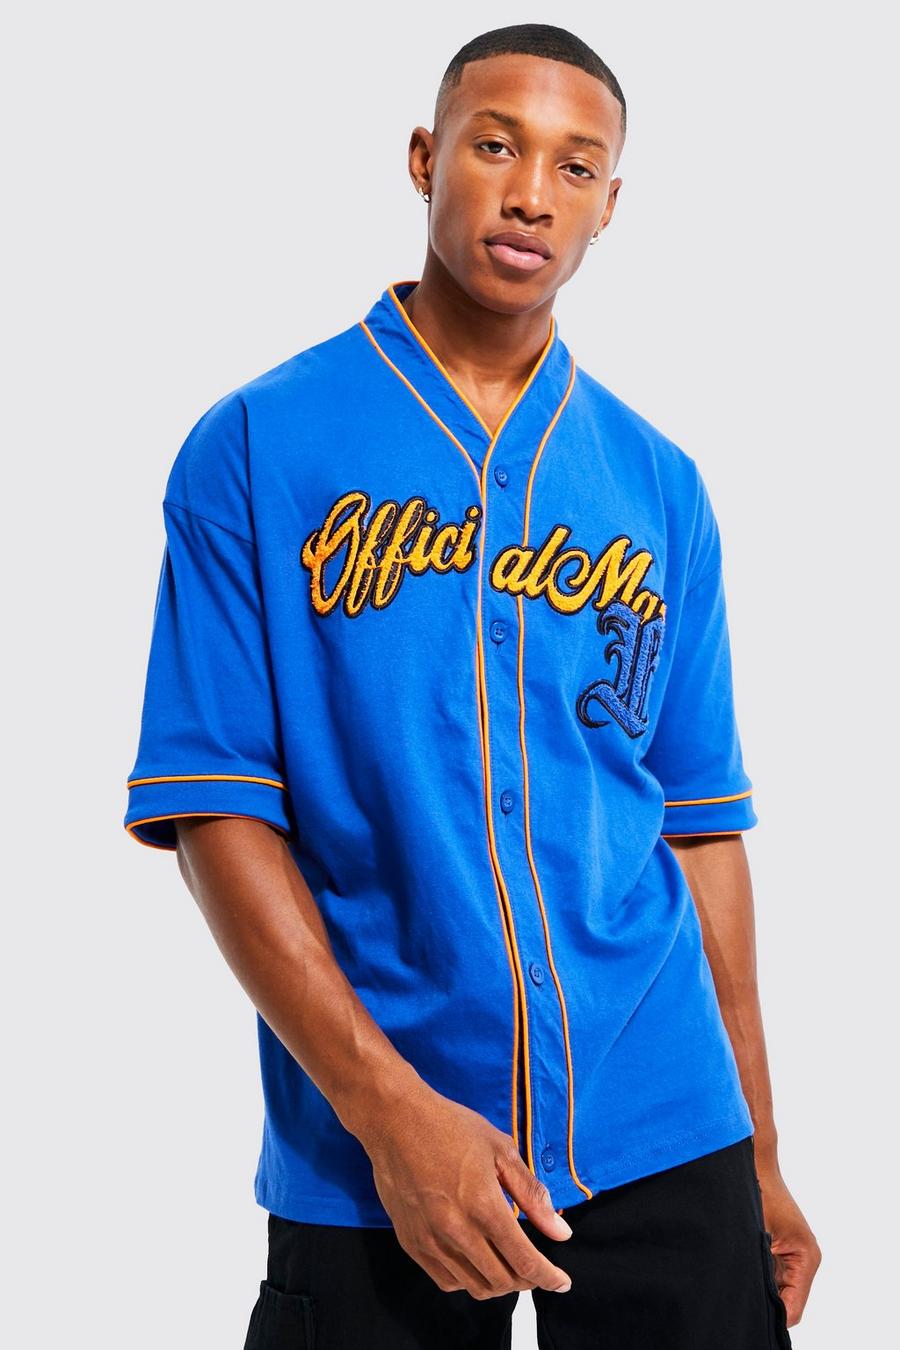 please help me style this oversized baseball jersey 🆘 #help